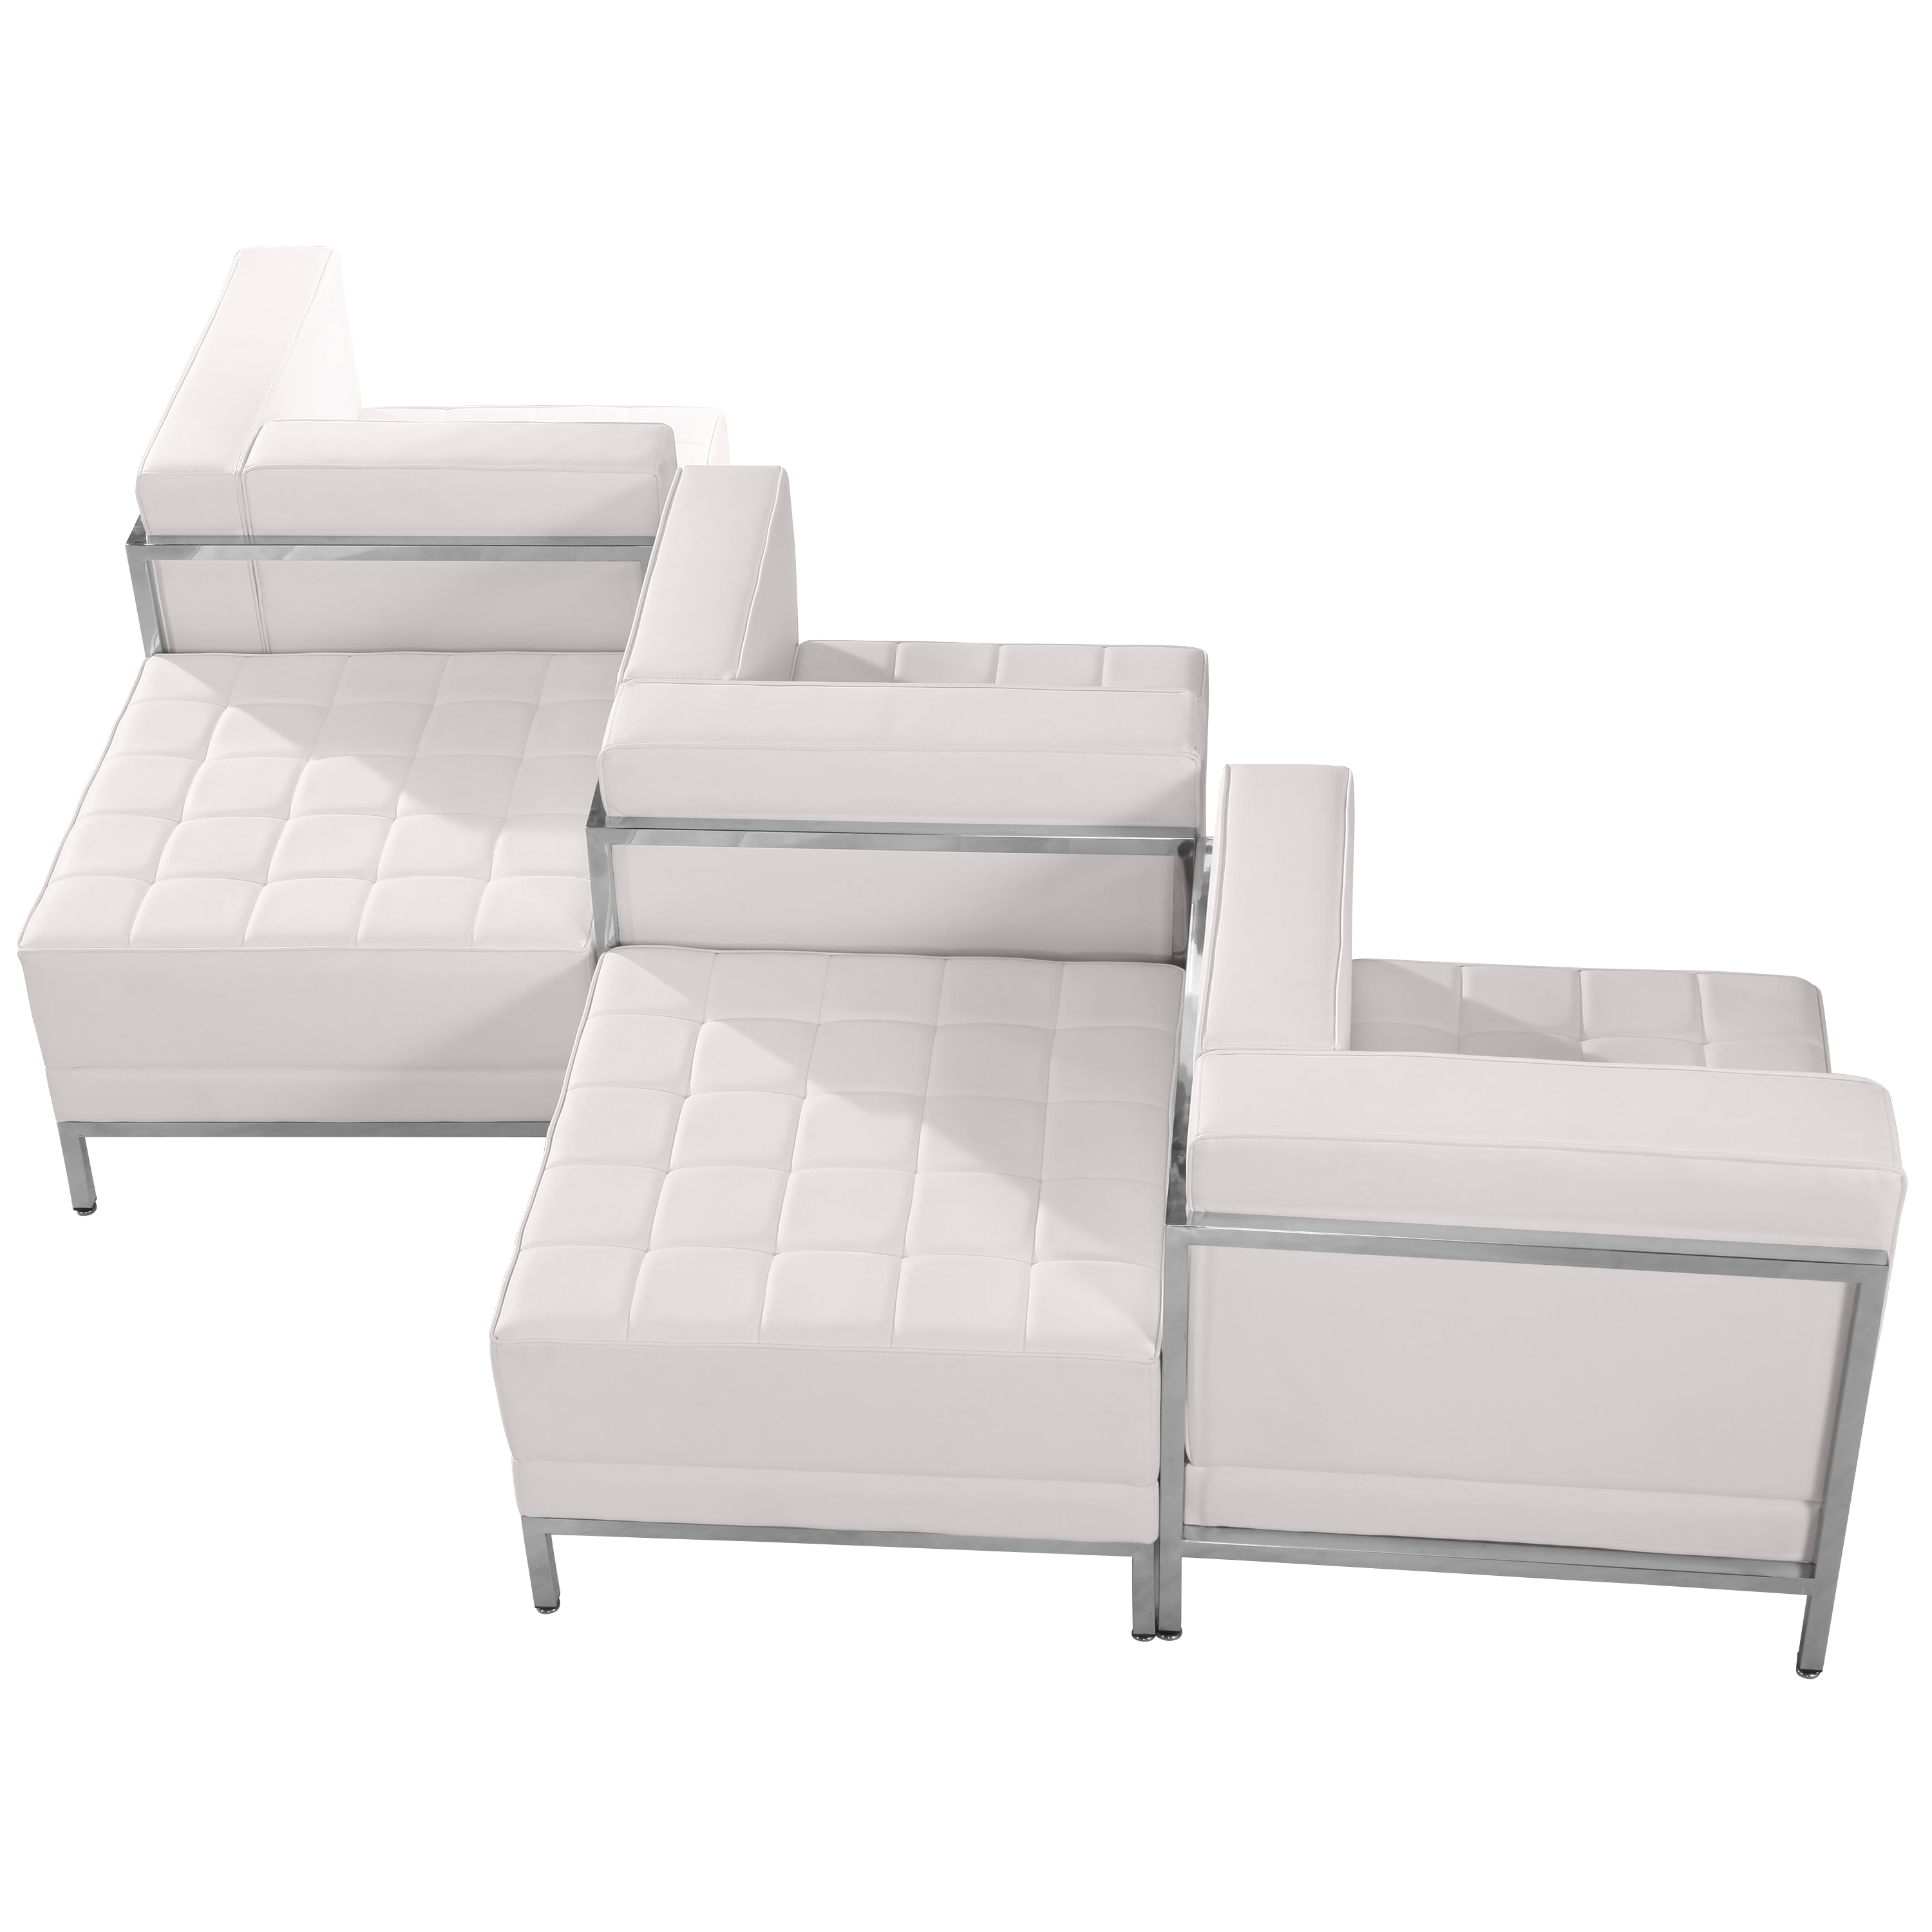 Flash Furniture ZB-IMAG-SET5-WH-GG Hercules Imagination Series White LeatherSoft 5 Piece Chair & Ottoman Set